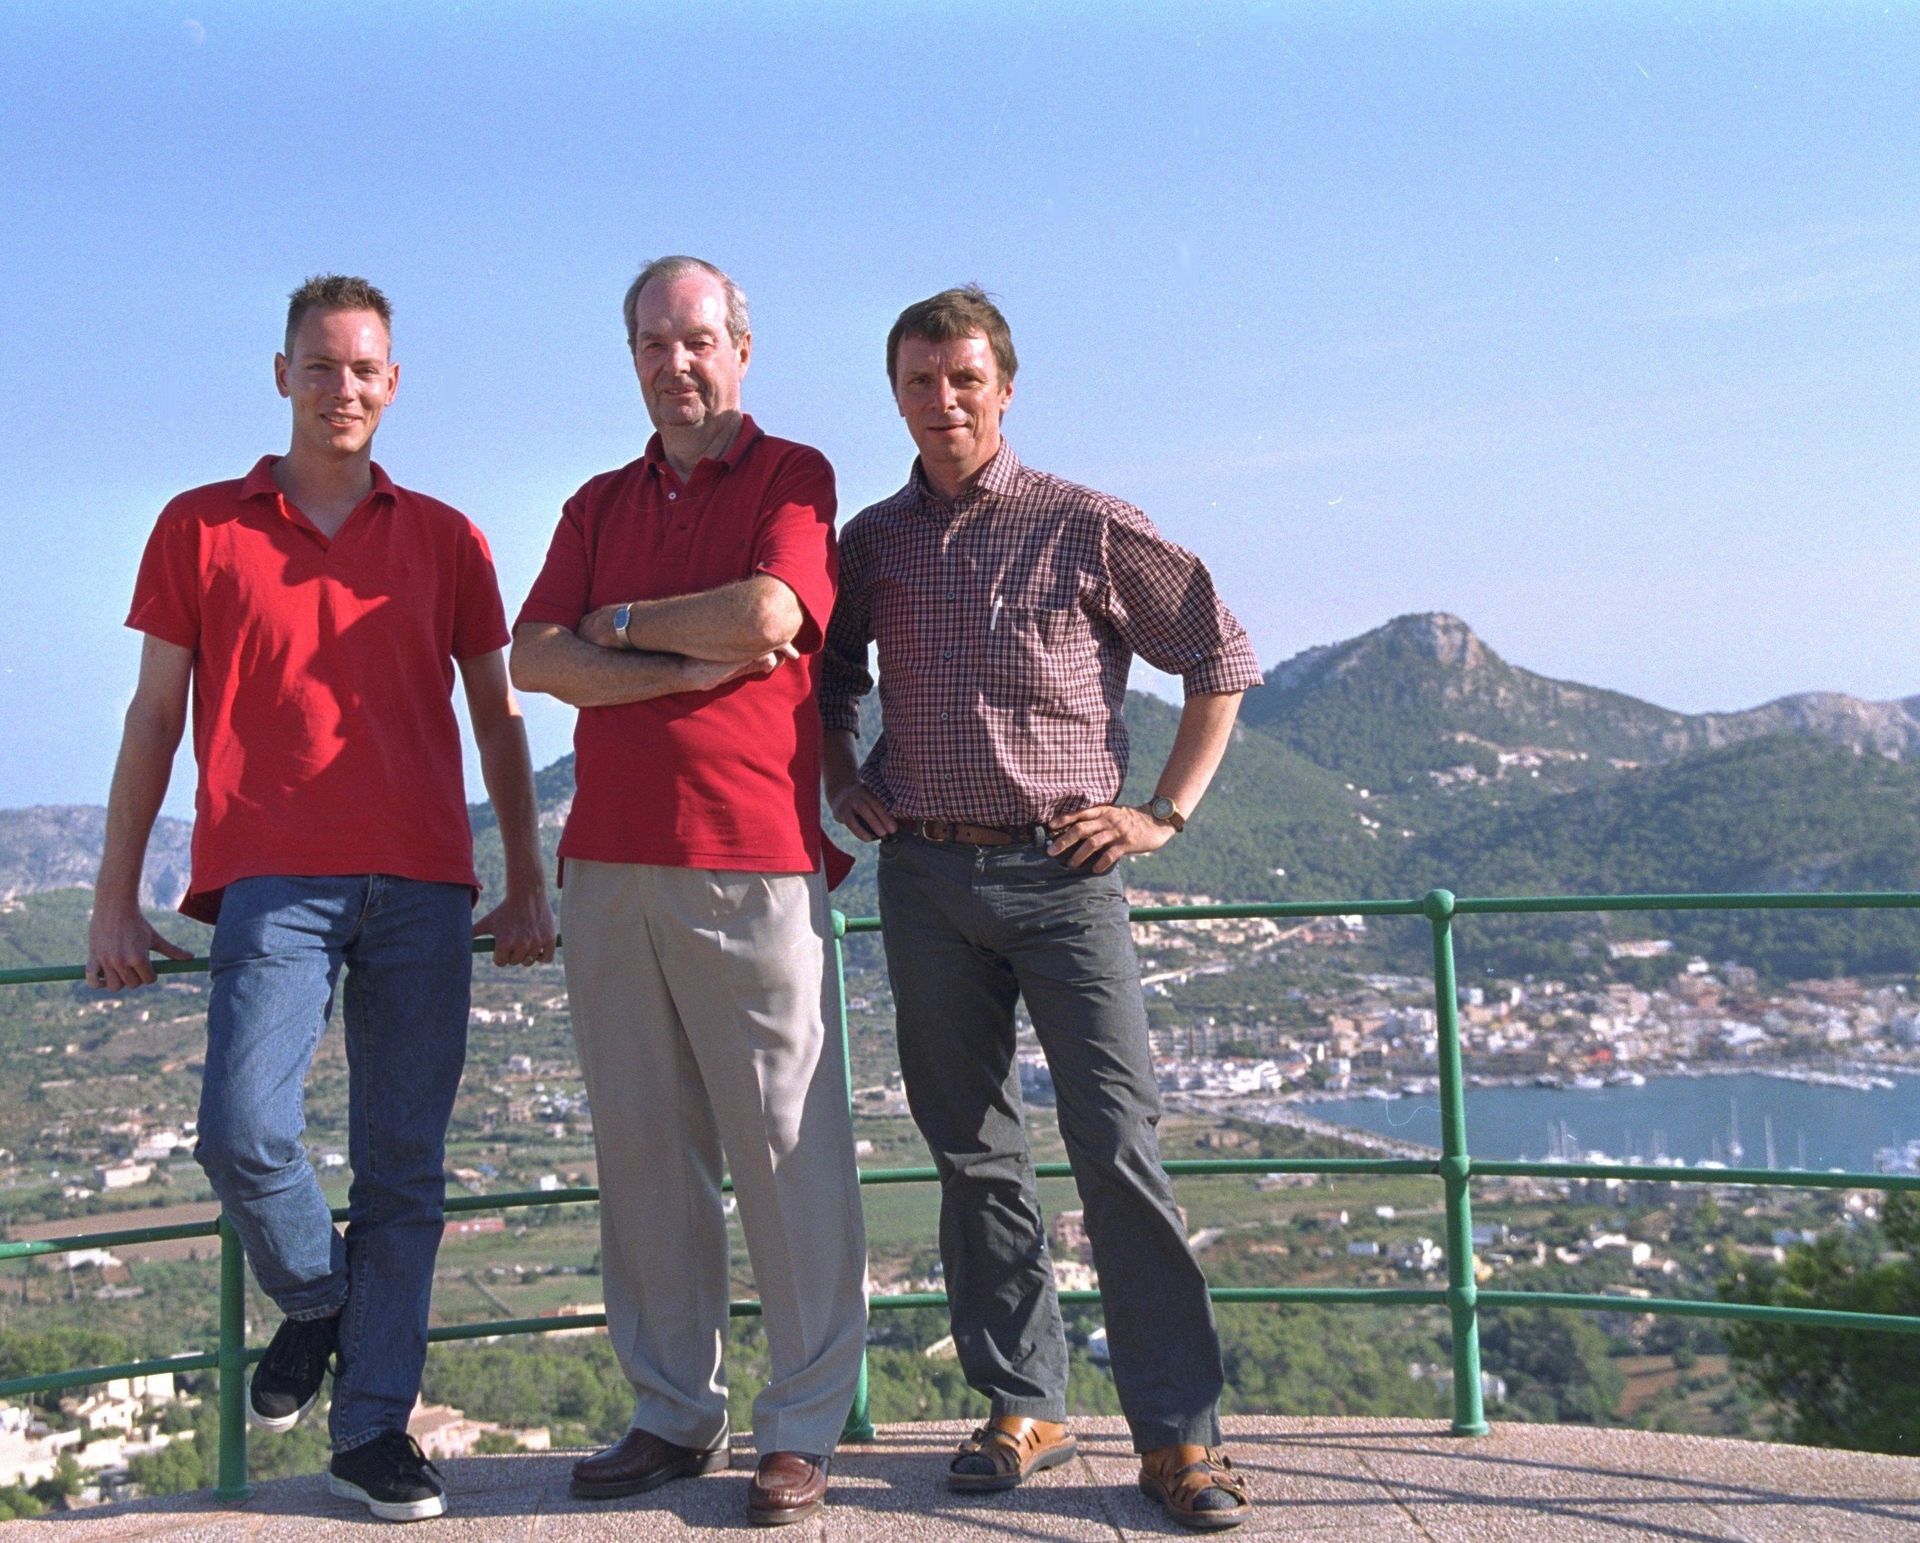 Martijn Mulder (L) and Dirk Kloosterboer (R), together with four time Bond director Guy Hamilton at his house in Mallorca